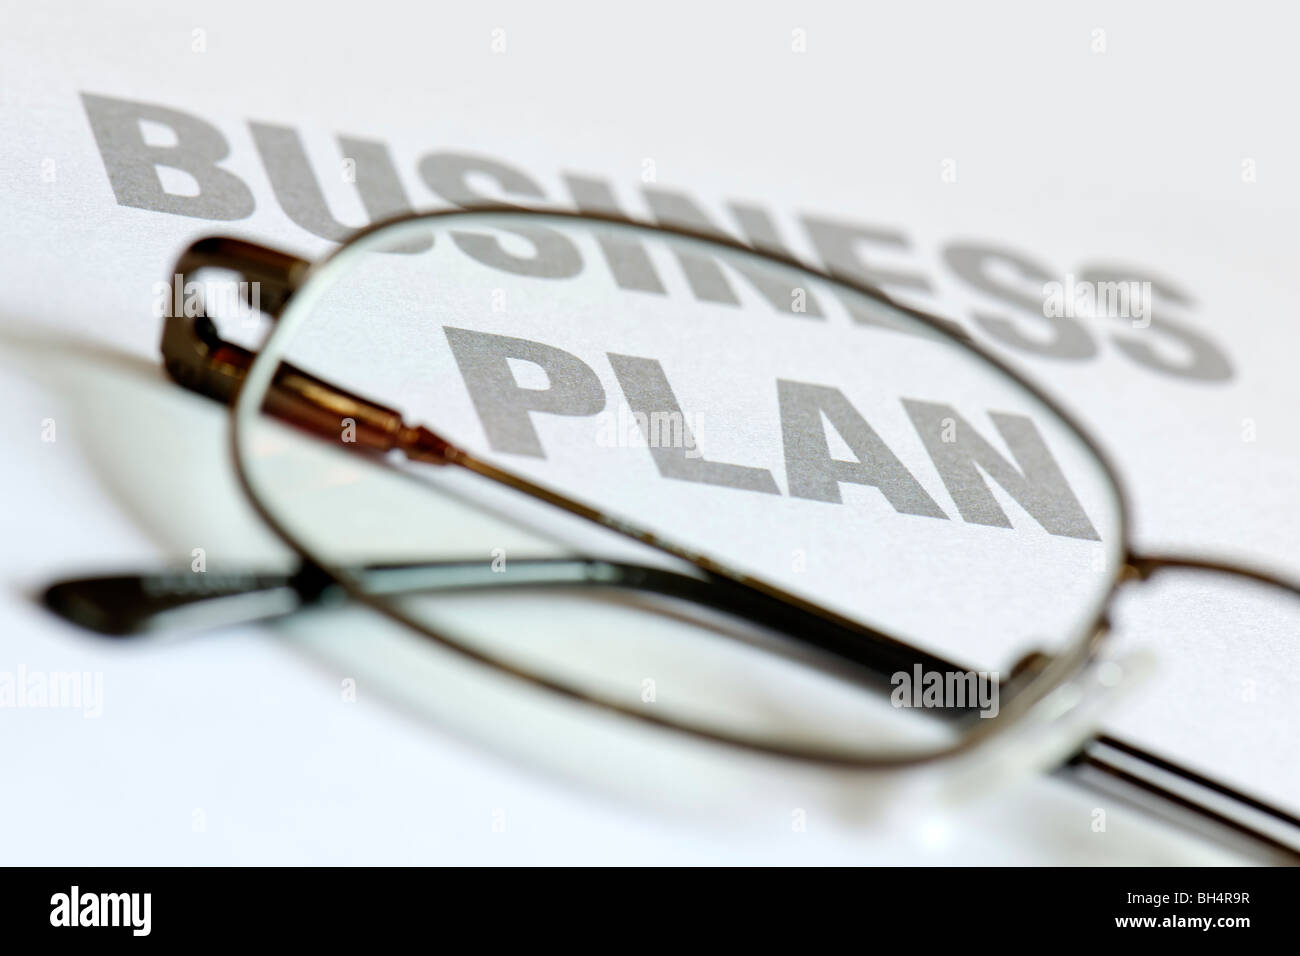 The Business Plan Stock Photo